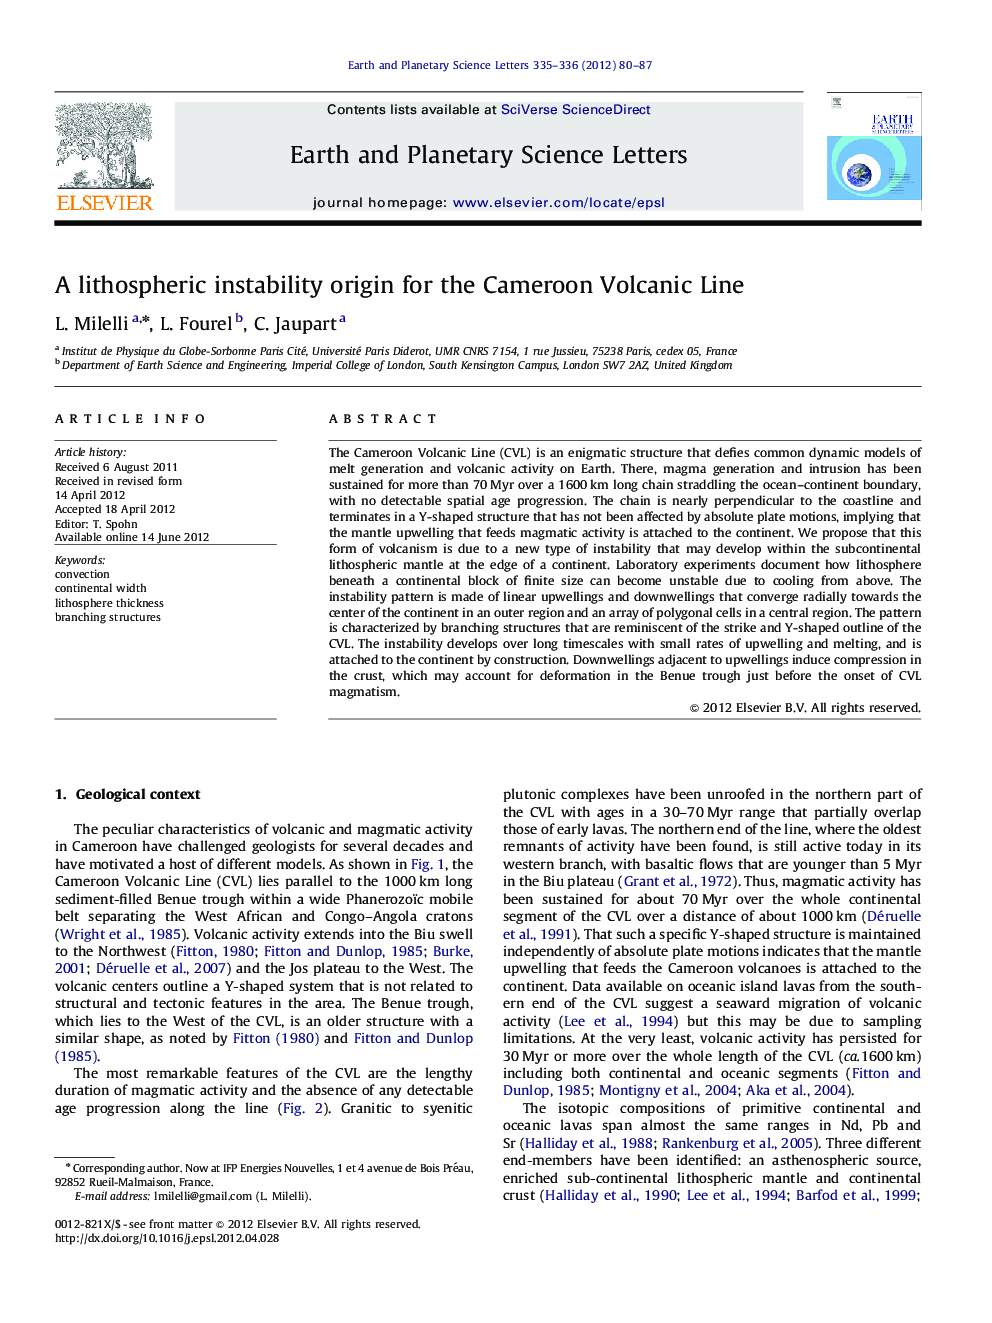 A lithospheric instability origin for the Cameroon Volcanic Line